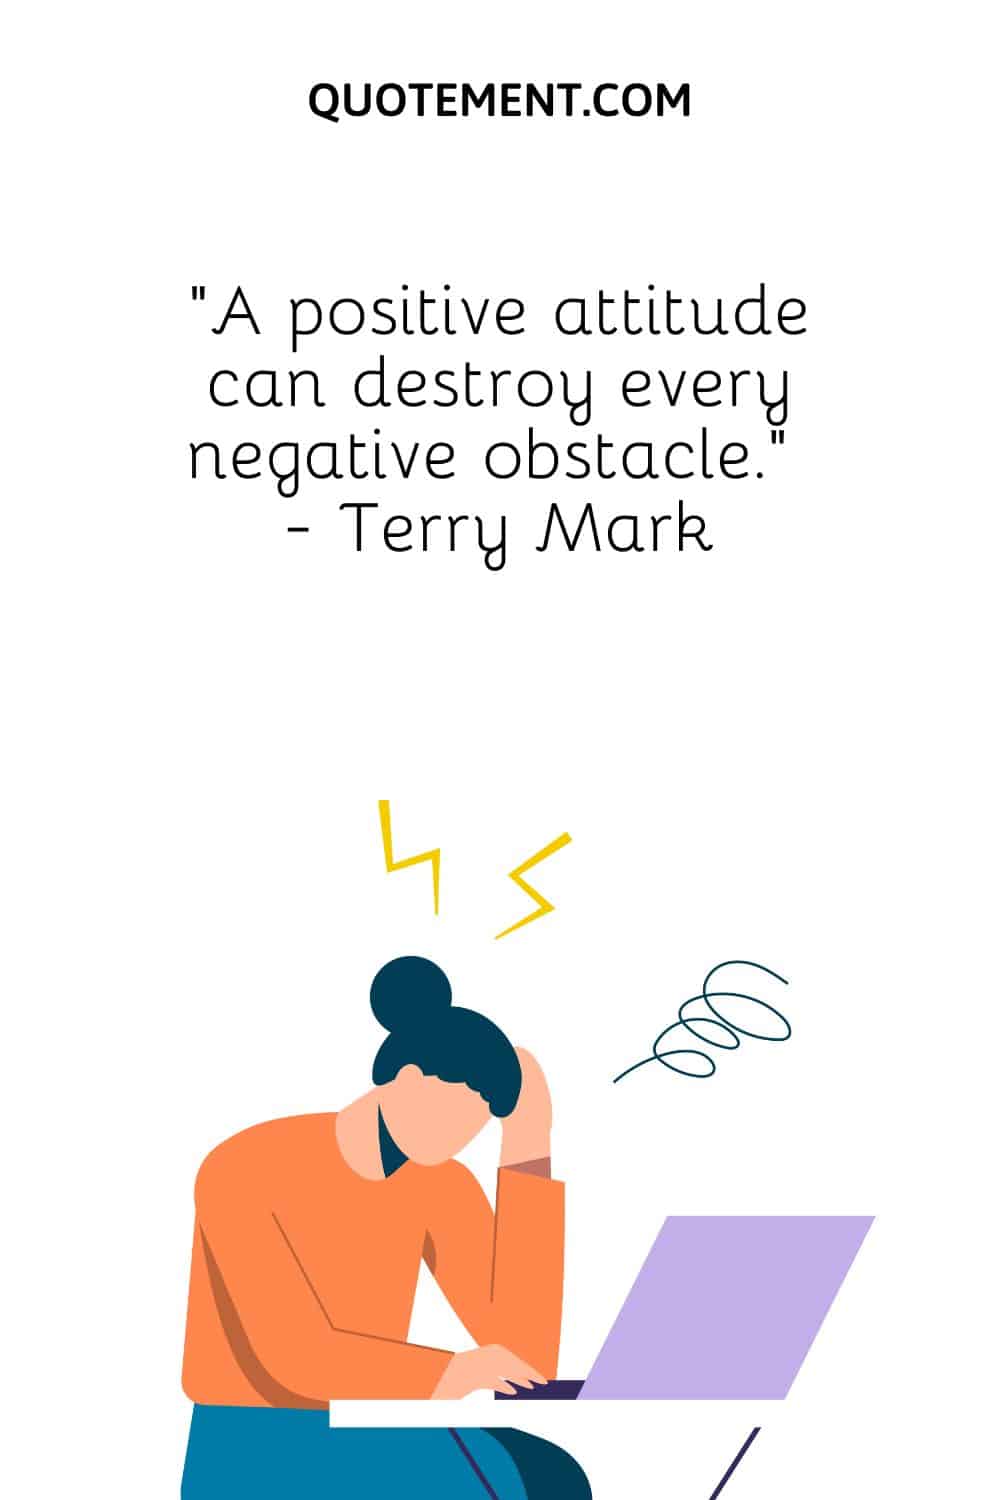 A positive attitude can destroy every negative obstacle